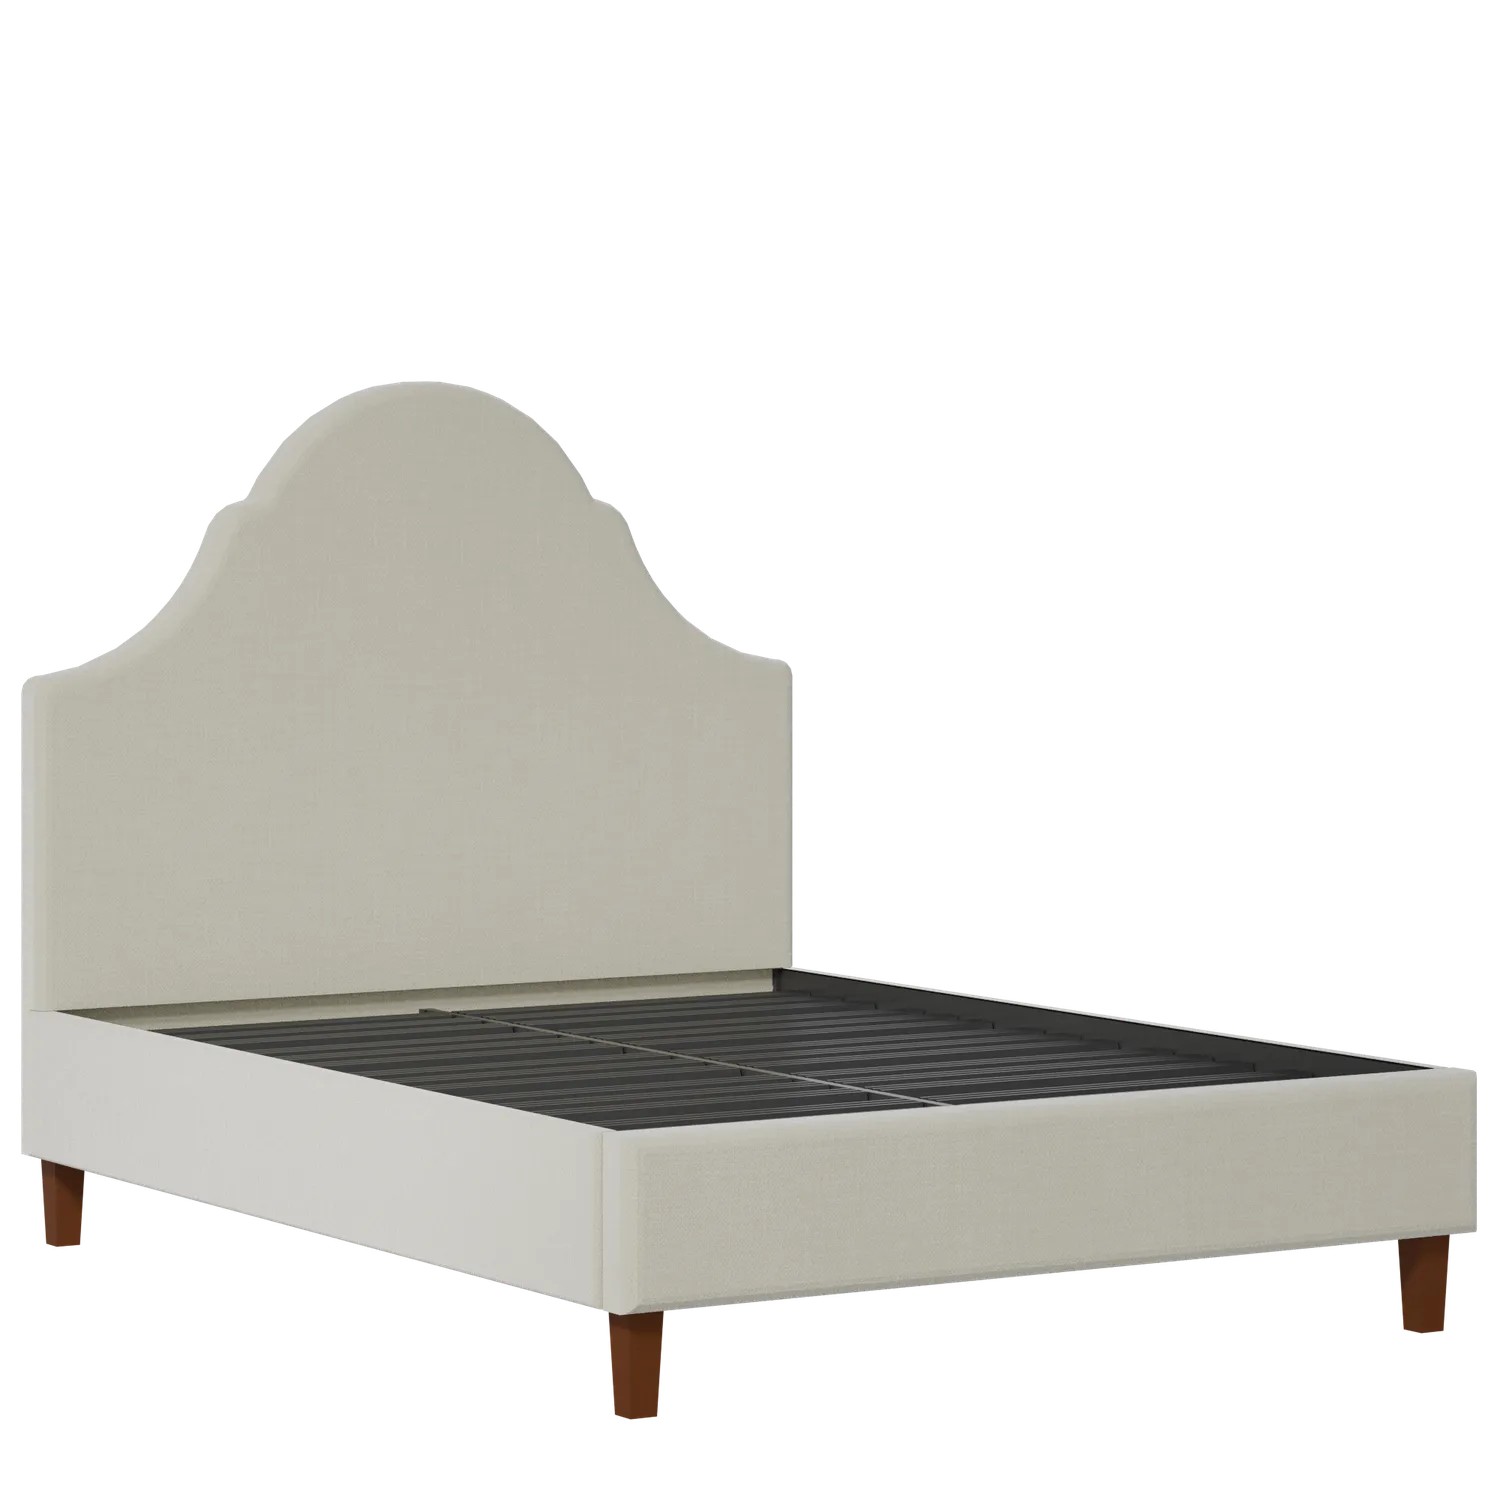 Irvine upholstered bed in oatmeal fabric